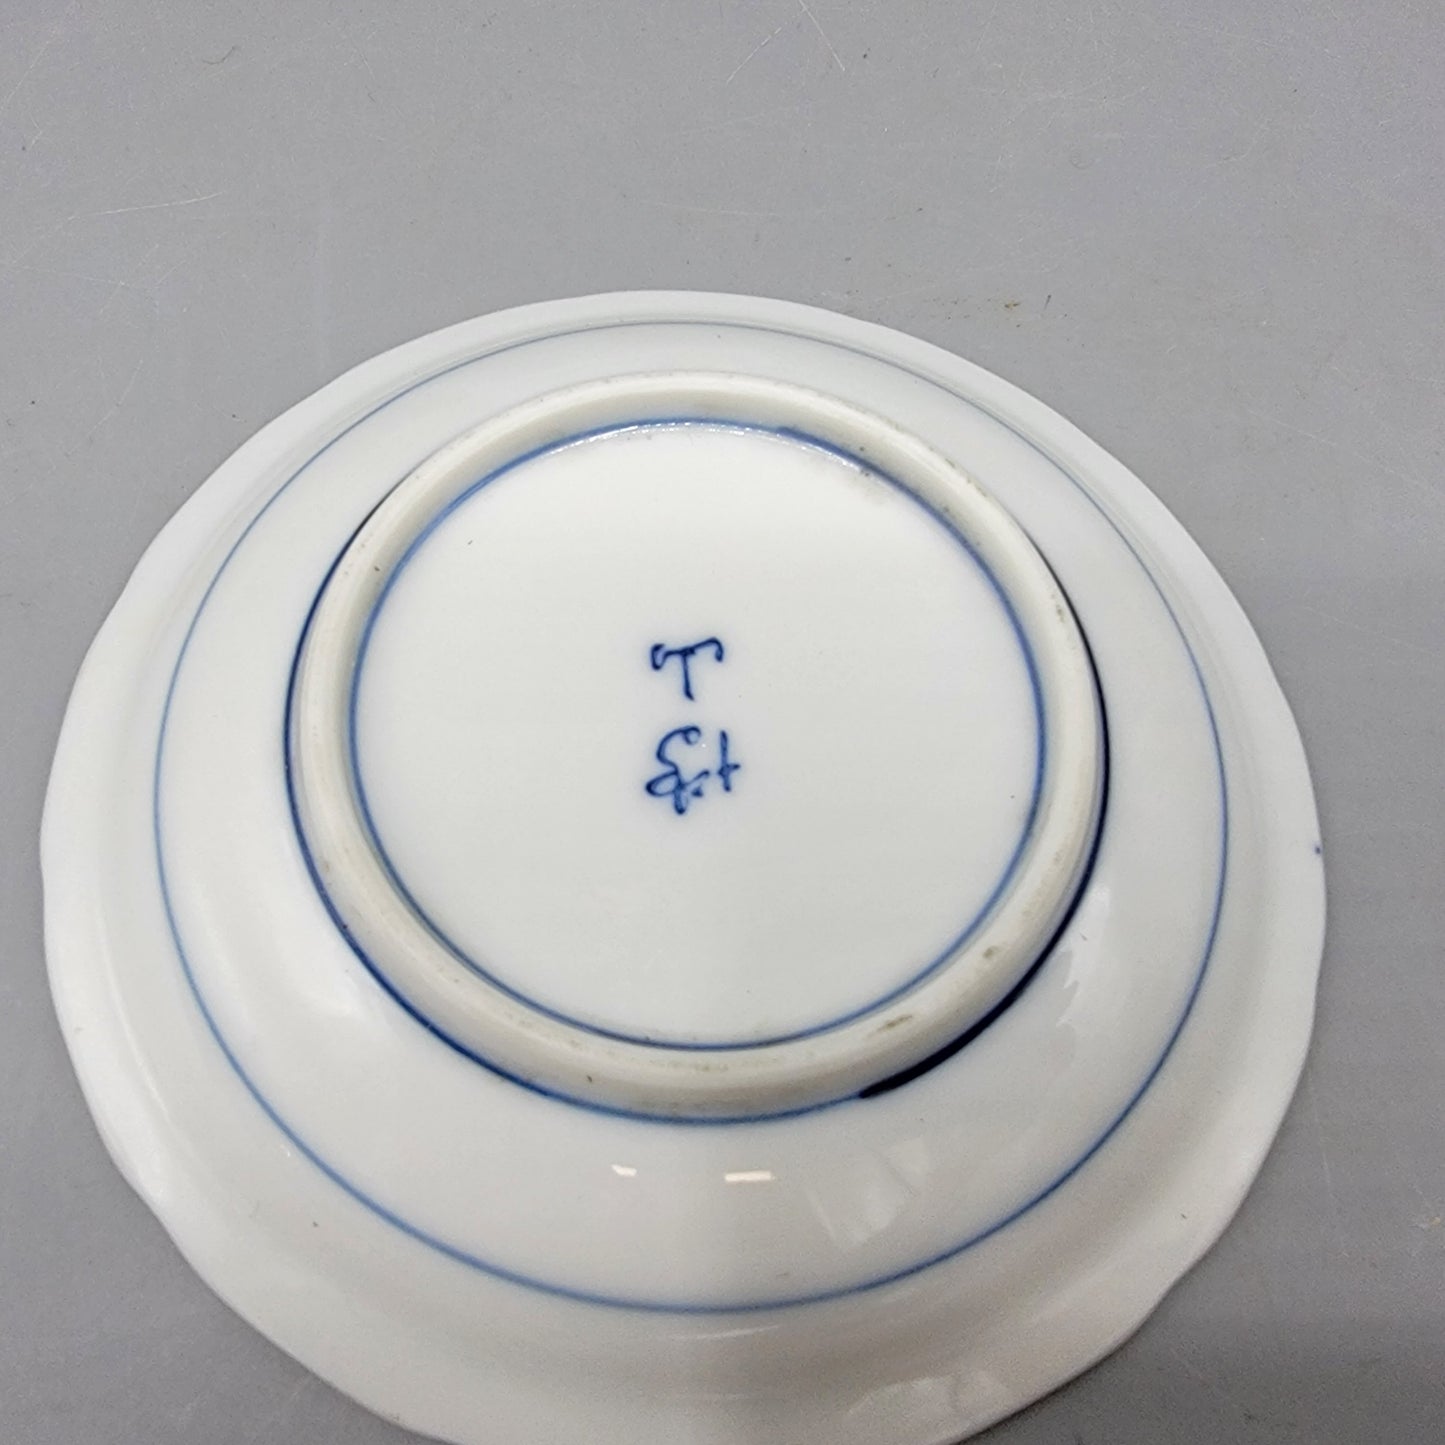 Japanese Blue and White Porcelain Diaper Pattern Plate